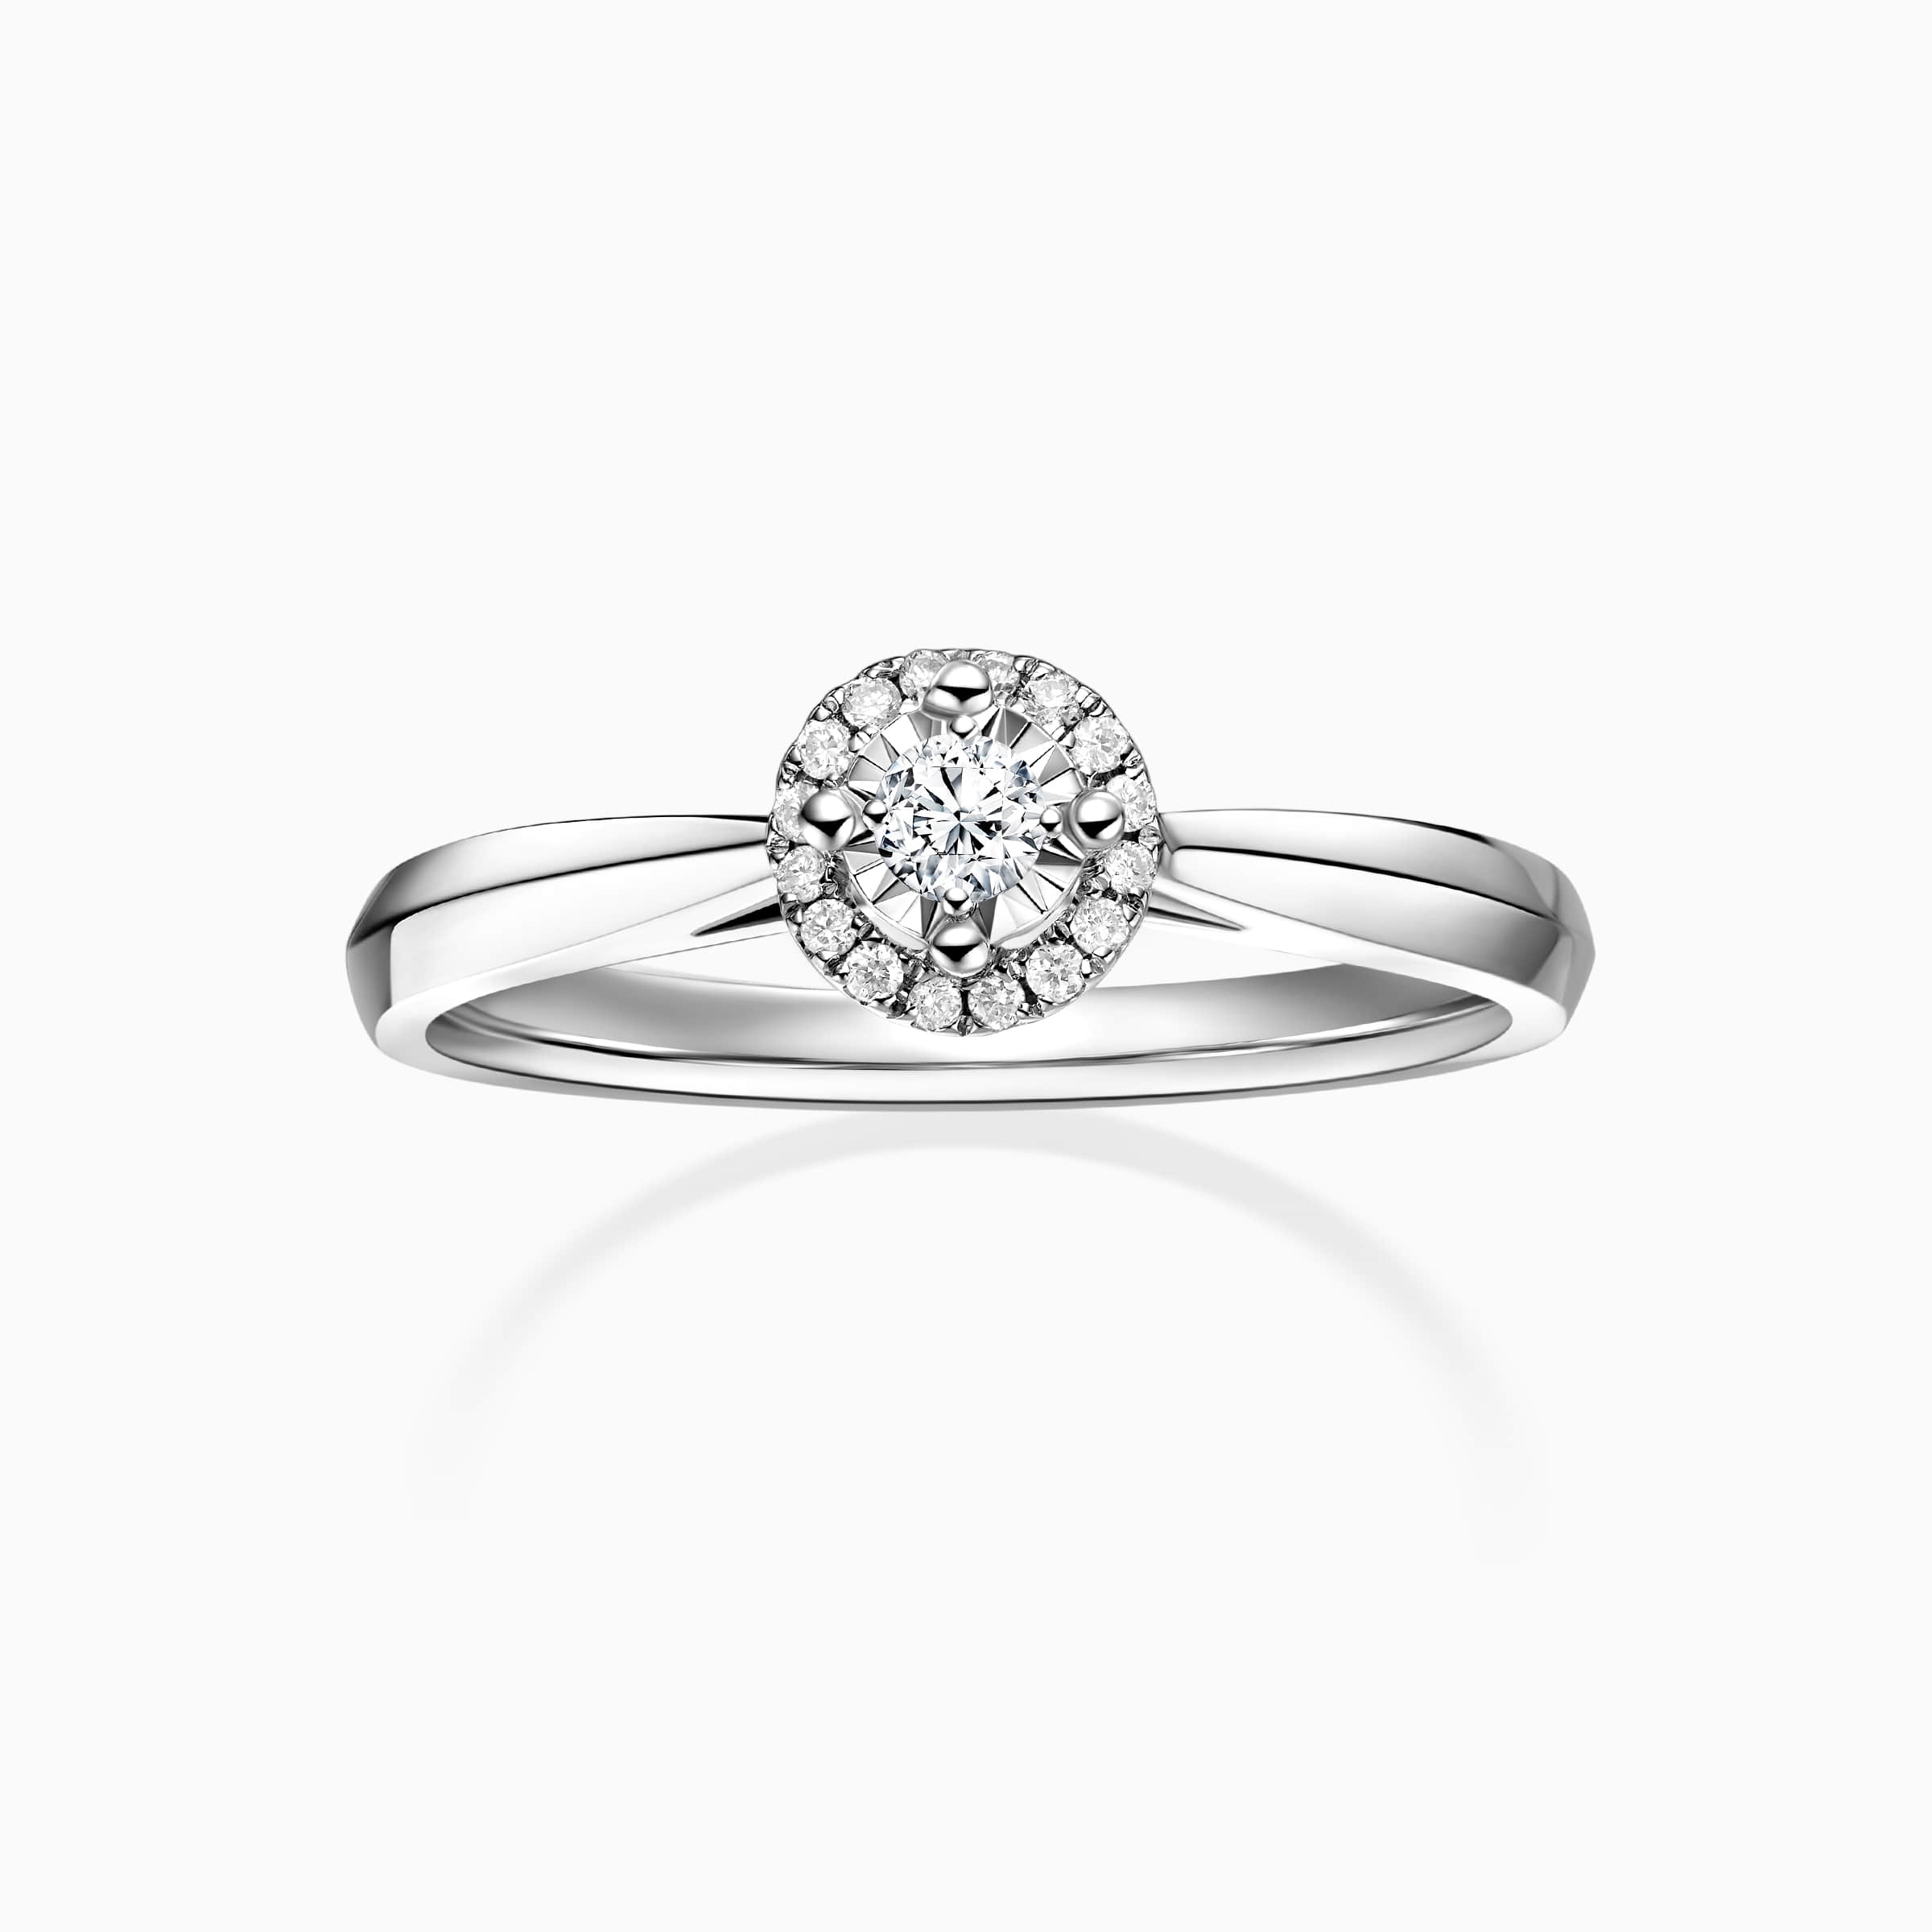 Darry Ring white gold promise ring